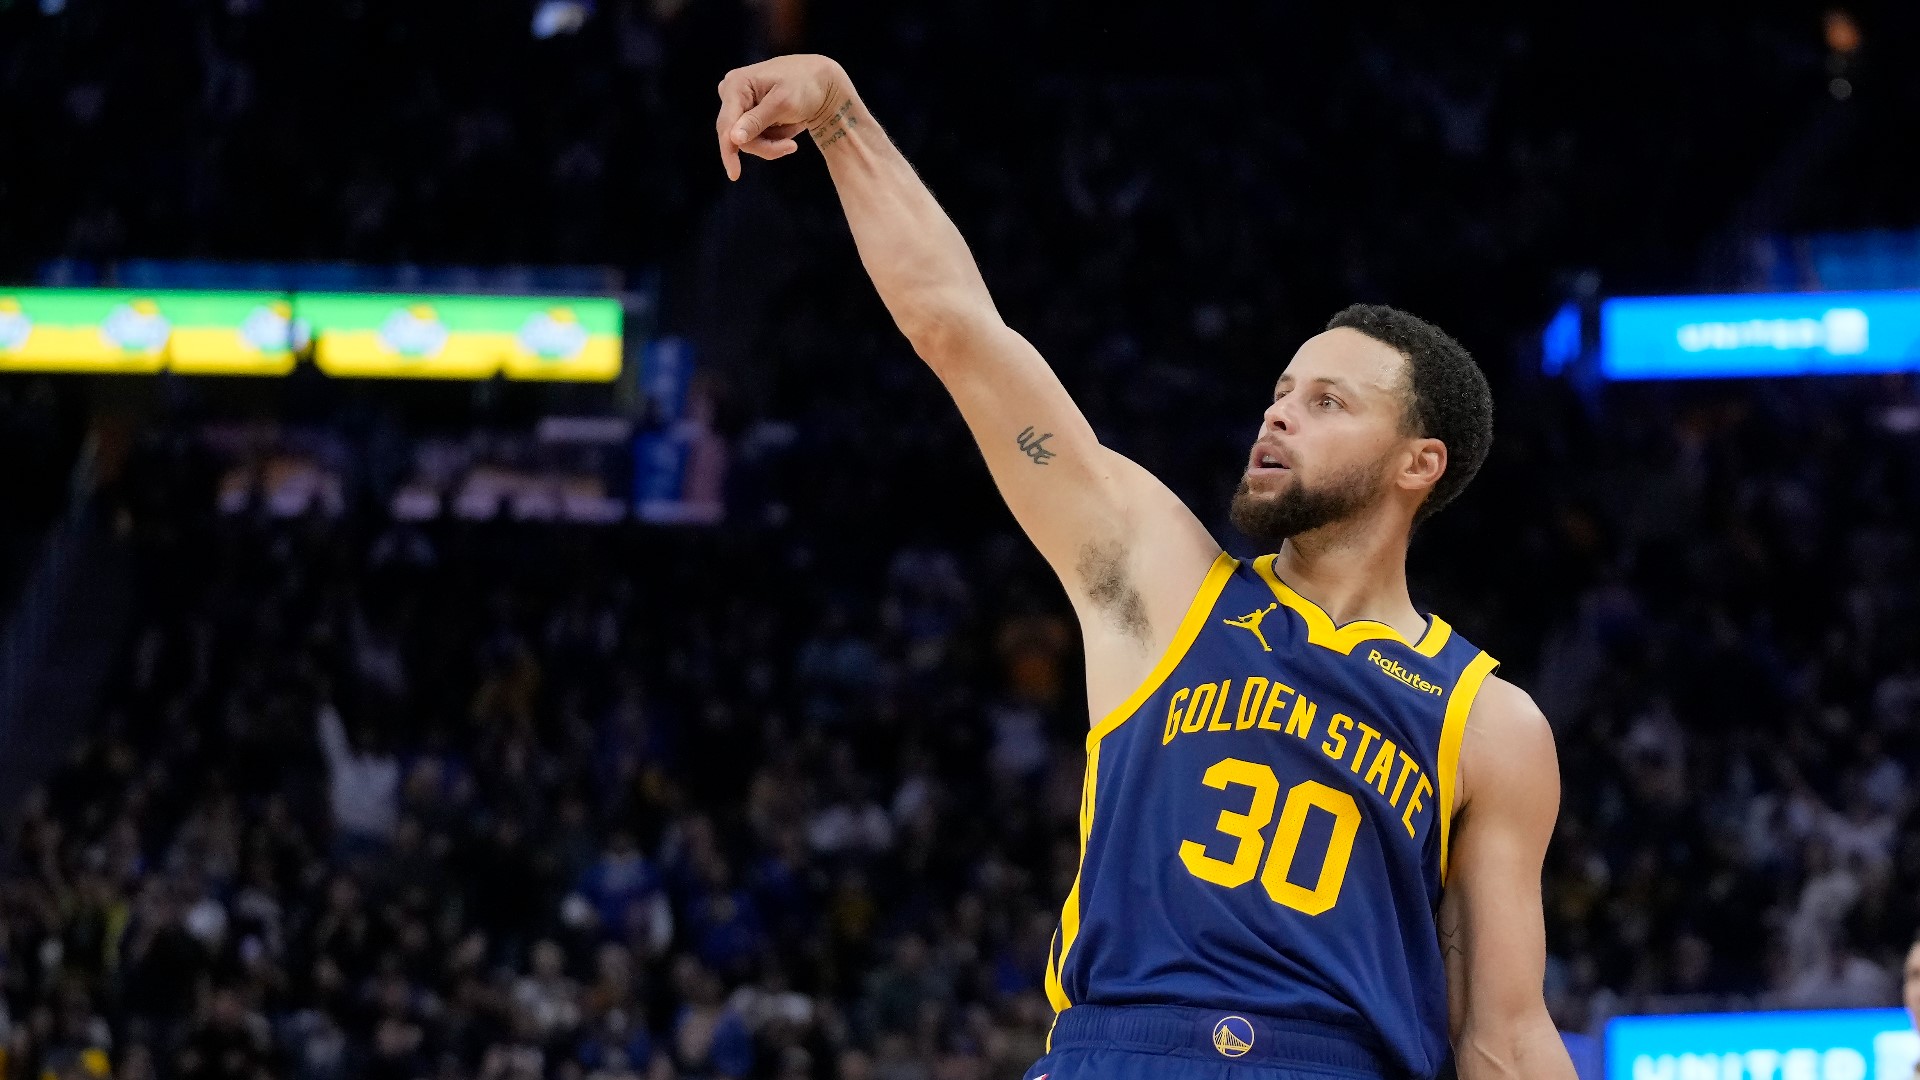 Warriors star Stephen Curry is bringing his Underrated Golf Tour to Notre Dame's Warren Golf Course from July 22nd to the 24th.